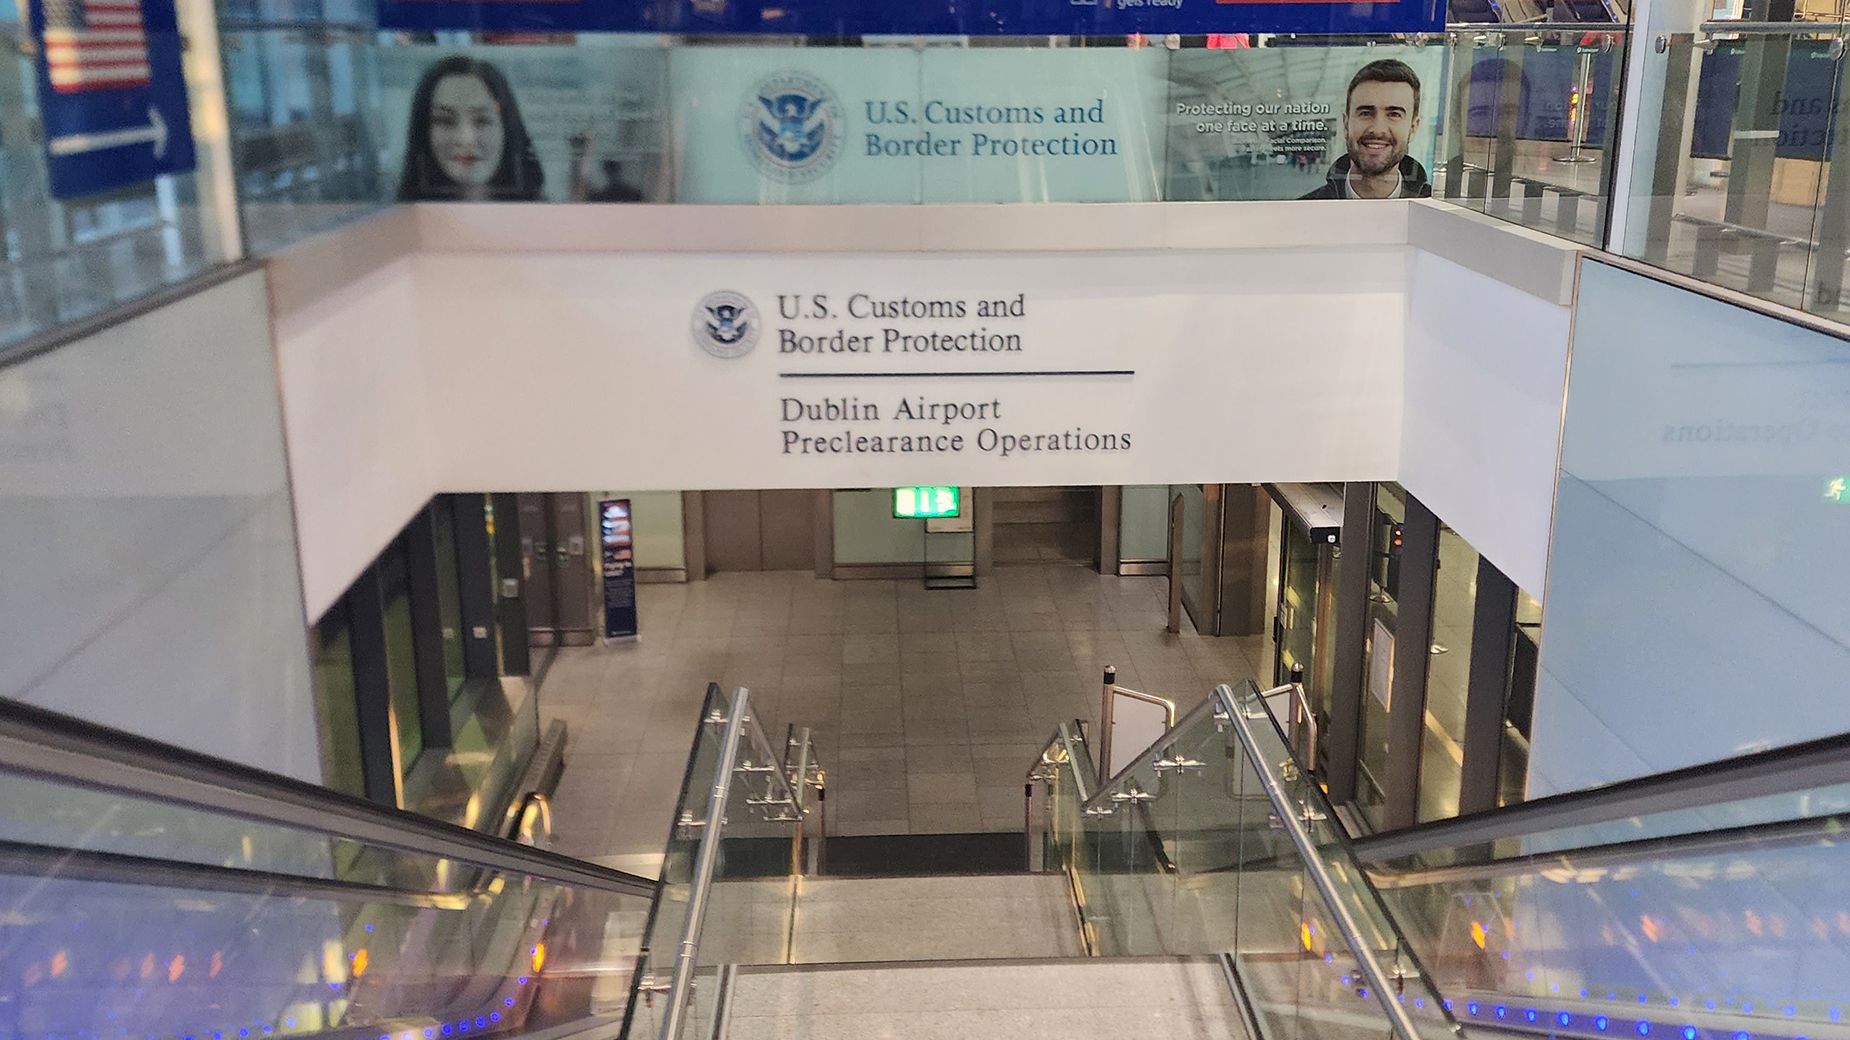 Preclearance allows travelers transiting to the US via select airports the abililty to clear US customs and immigration before they've even boarded the plane. Pictured here: the preclearance facility in Dublin Airport, Ireland.